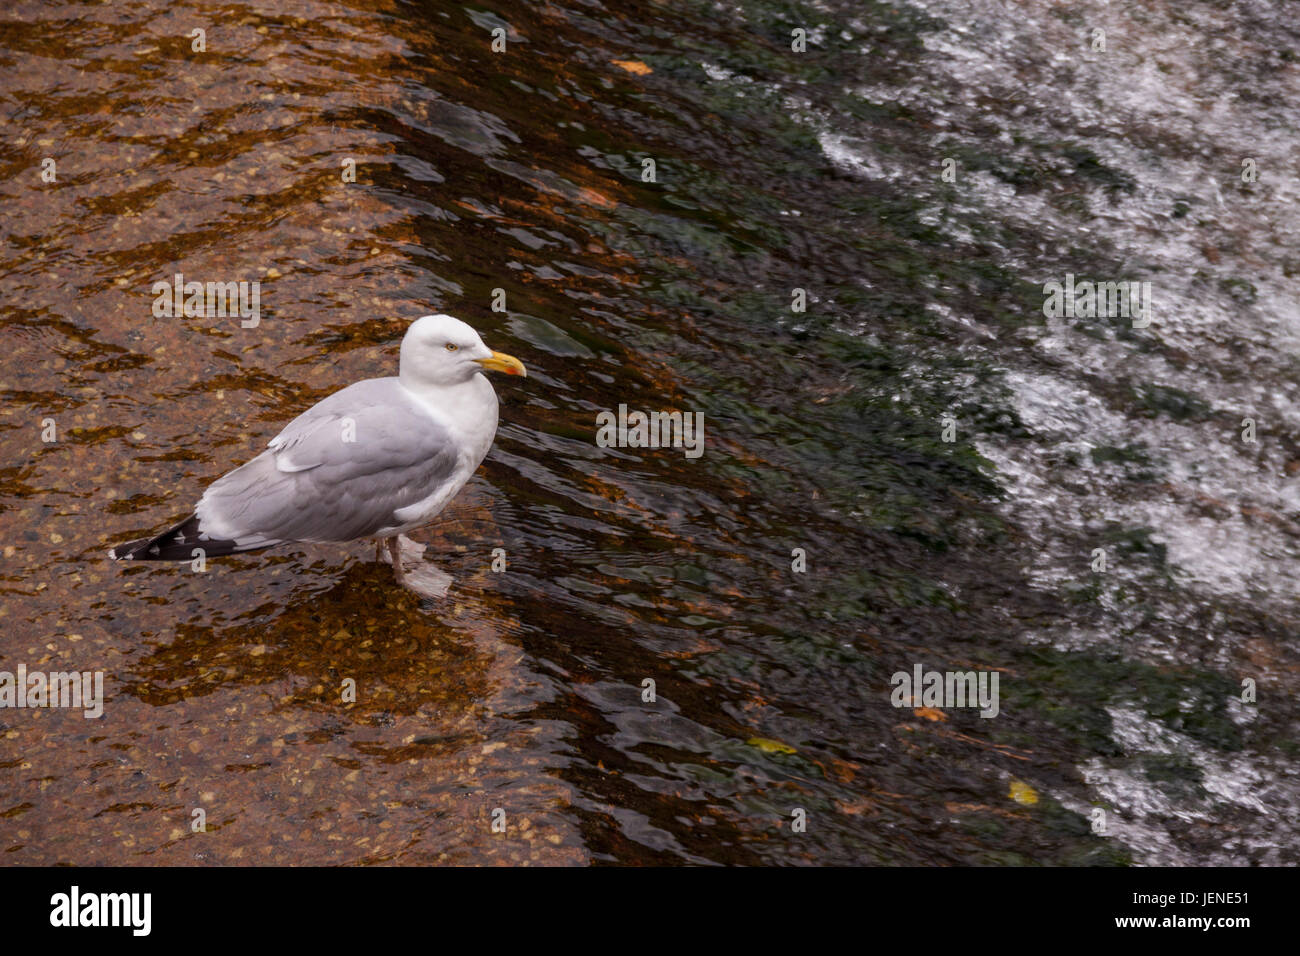 A common gull seagull Larus canus sitting at the edge of a weir. Stock Photo